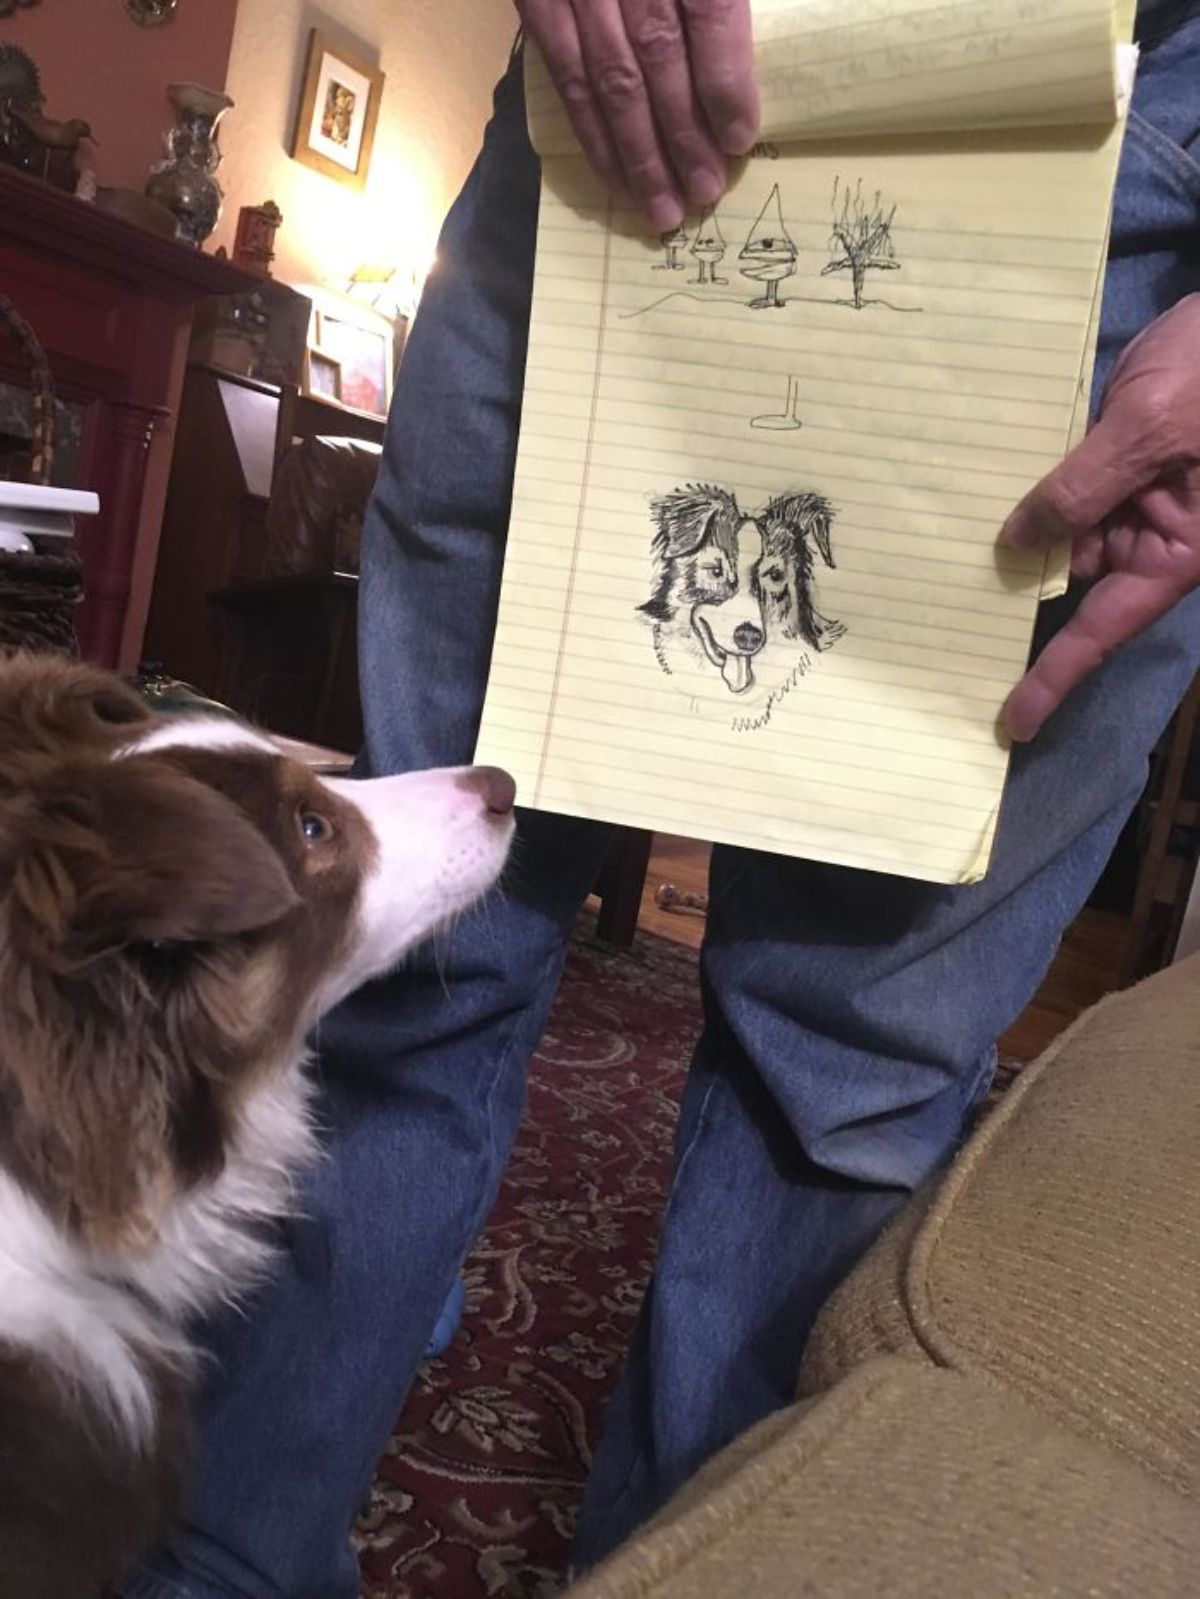 fluffy brown and white dog being showed a drawing of the dog on a yellow lined notepad by someone